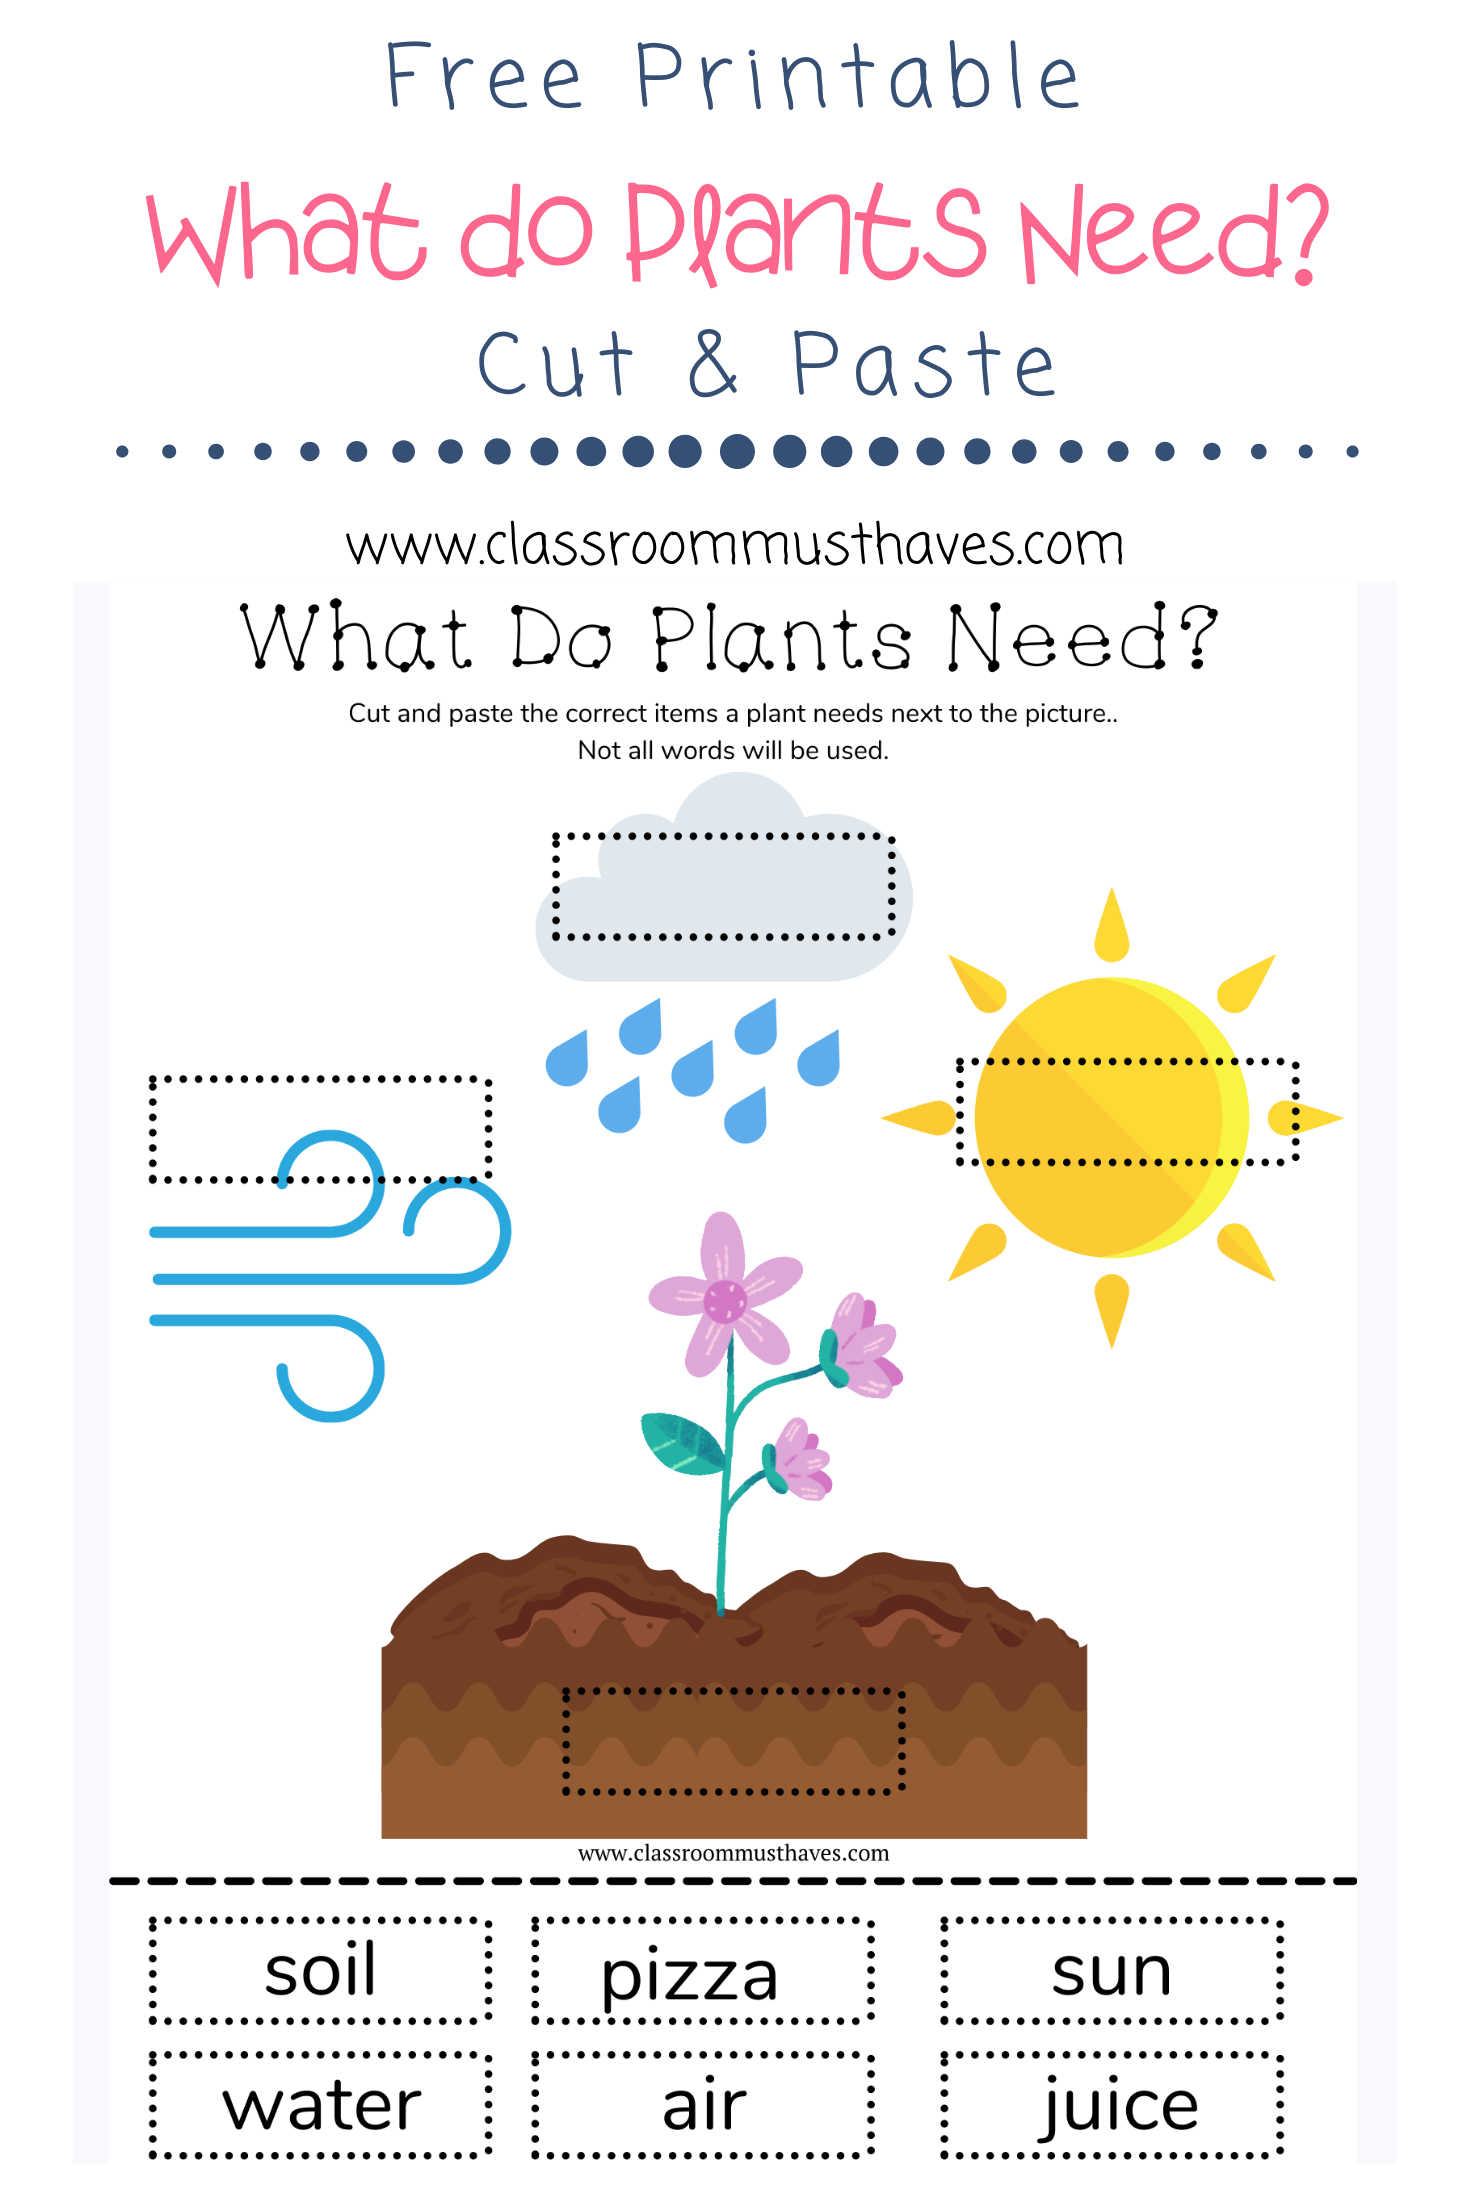 What to Plants Need Graphic